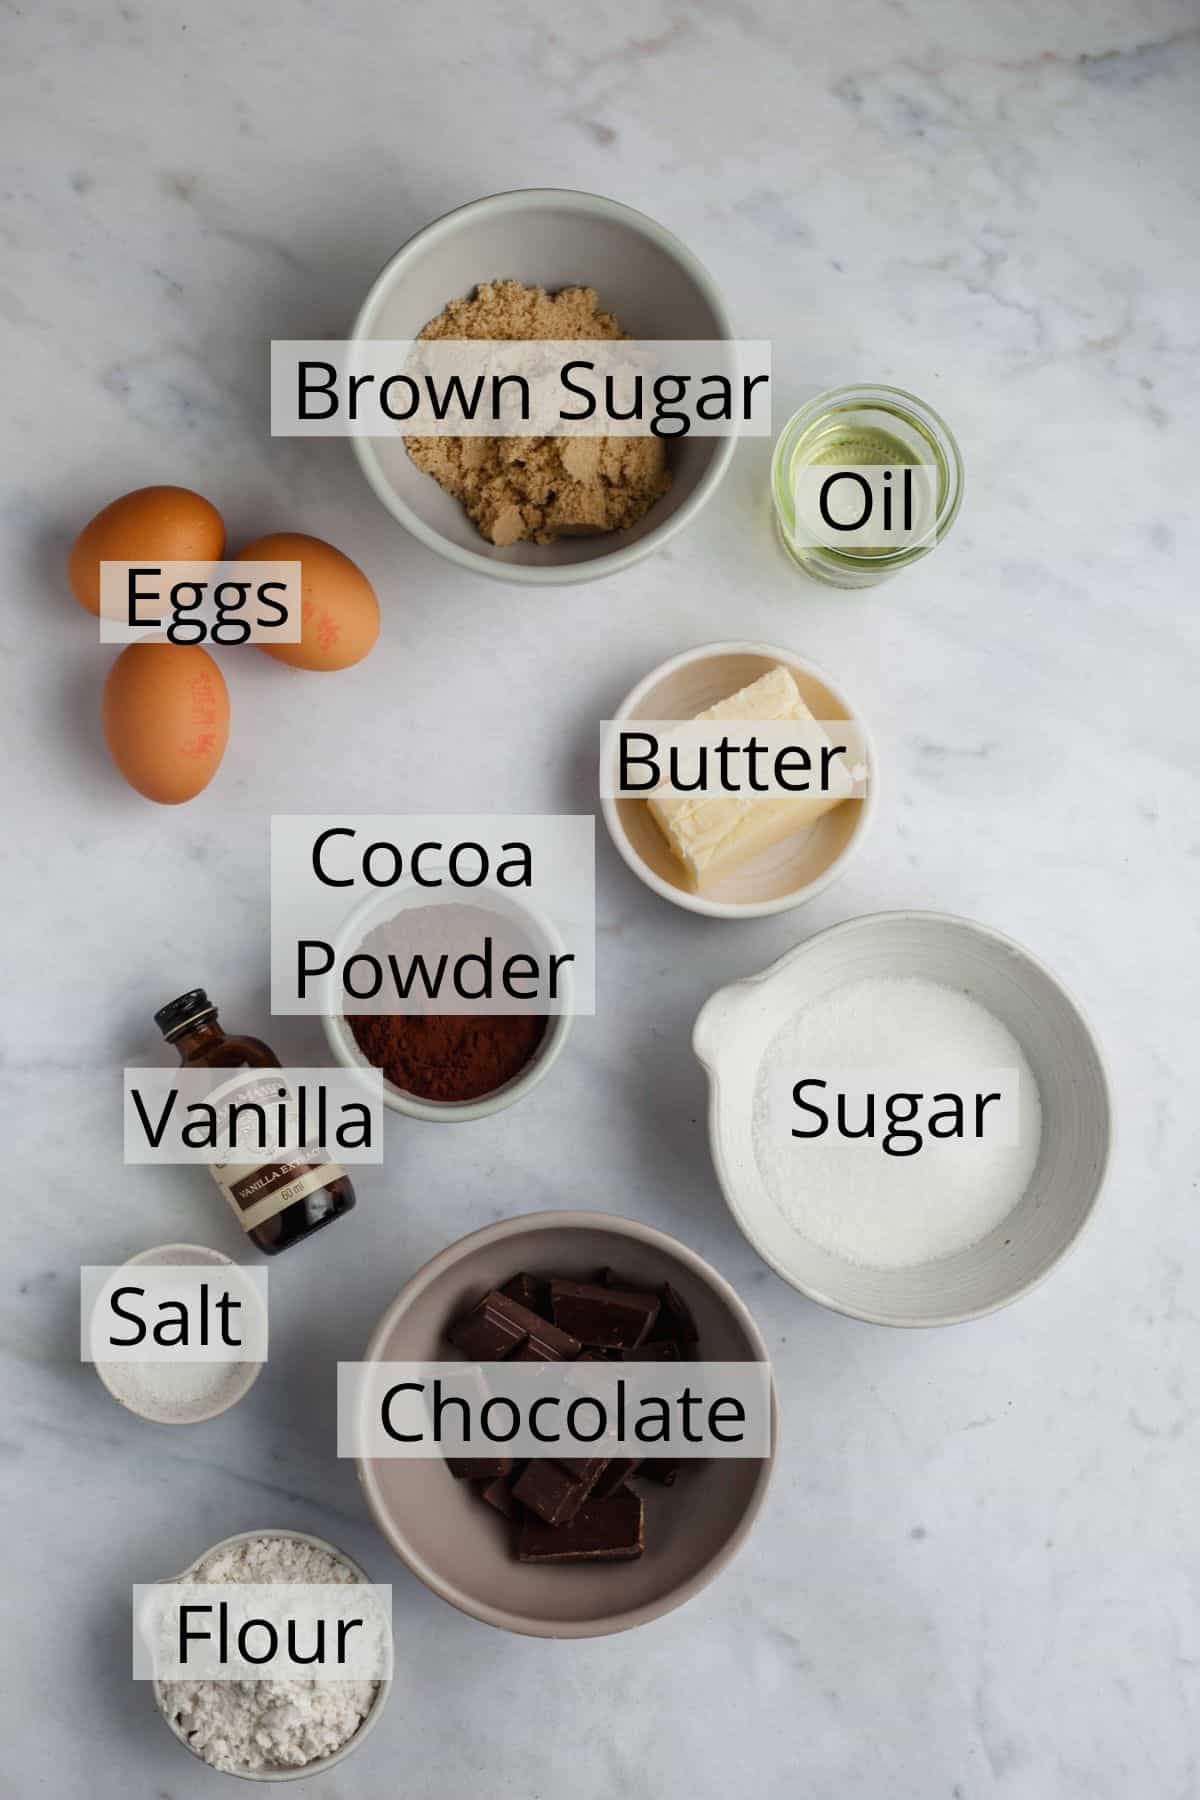 All the ingredients needed for brownies weighed out in small bowls.